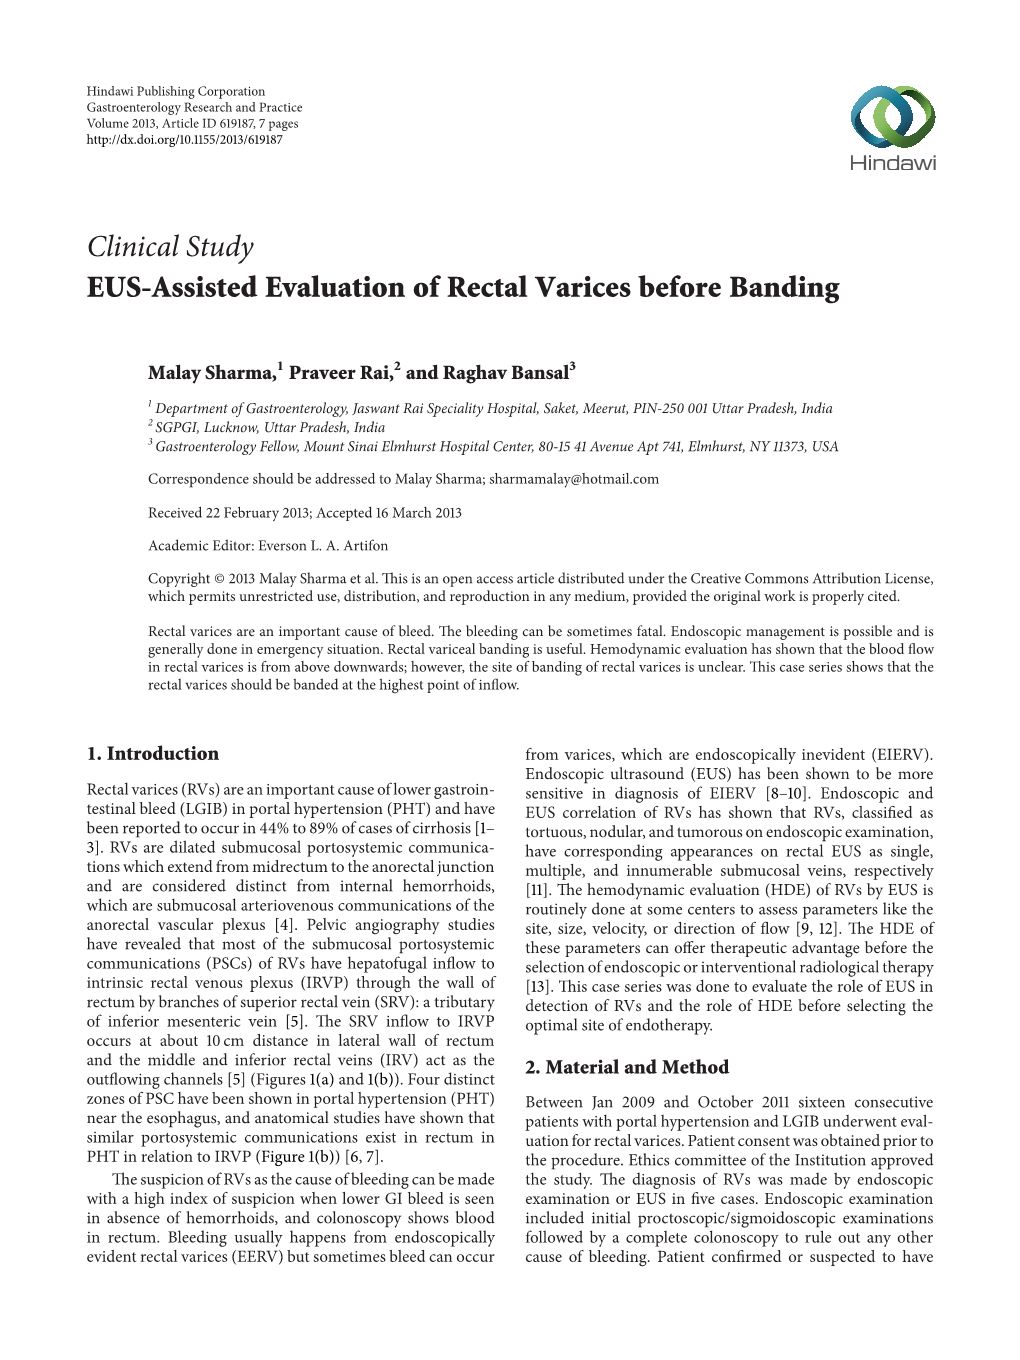 EUS-Assisted Evaluation of Rectal Varices Before Banding